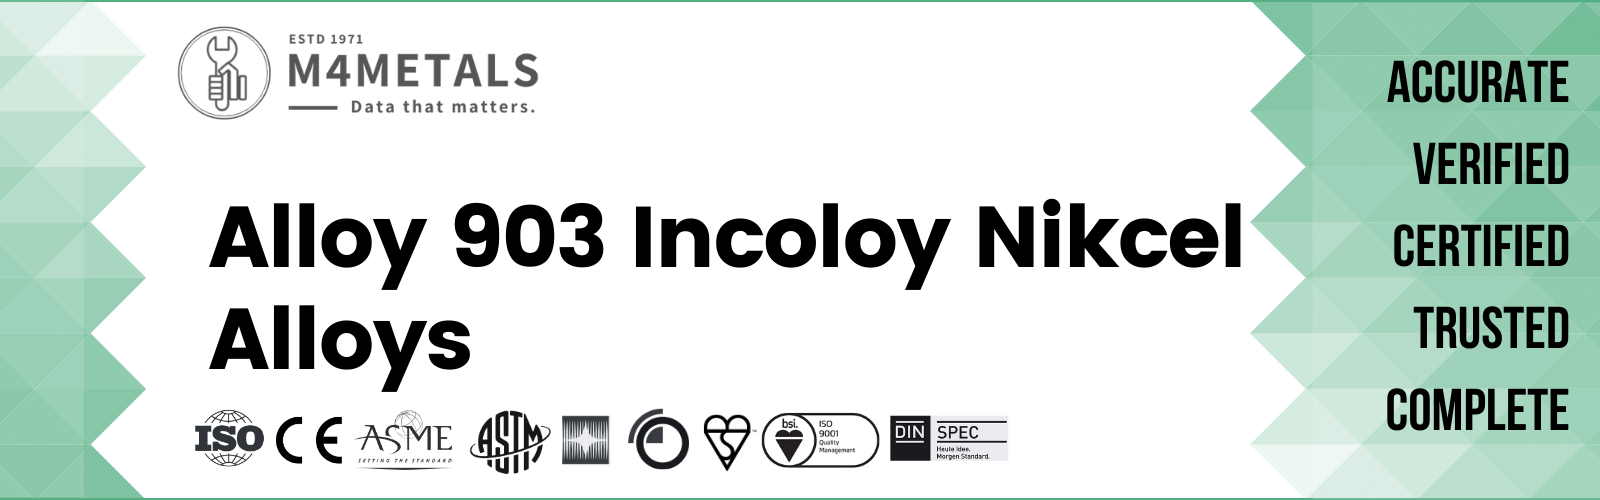 Incoloy Alloy 903